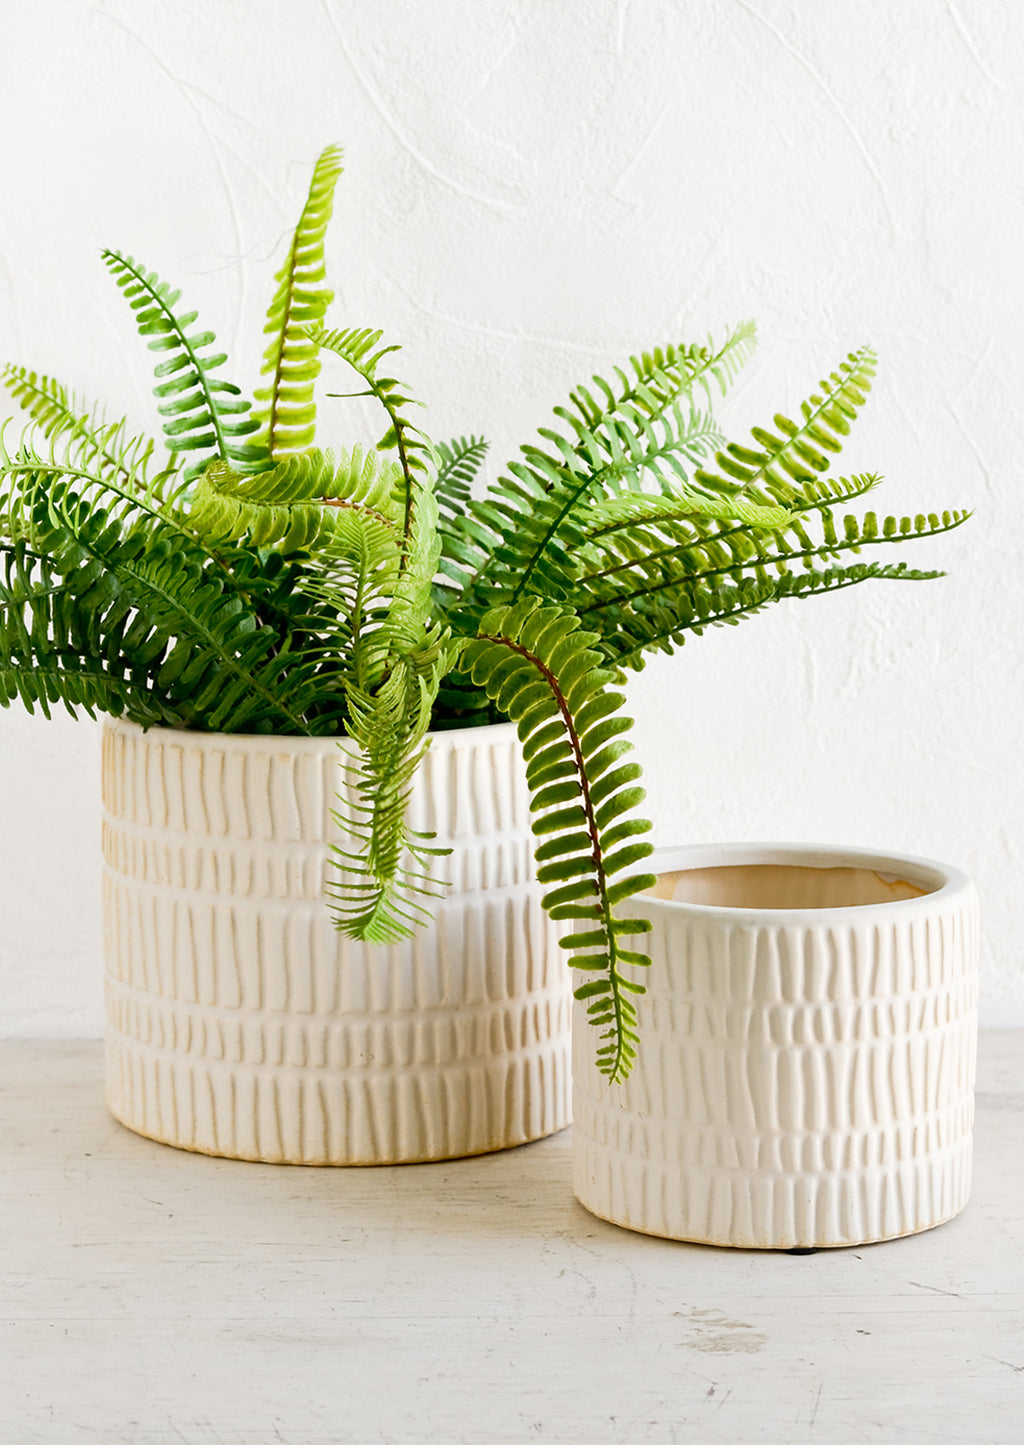 Small: Two bisque ceramic planters in small and large sizes, large size shown with fern plant.